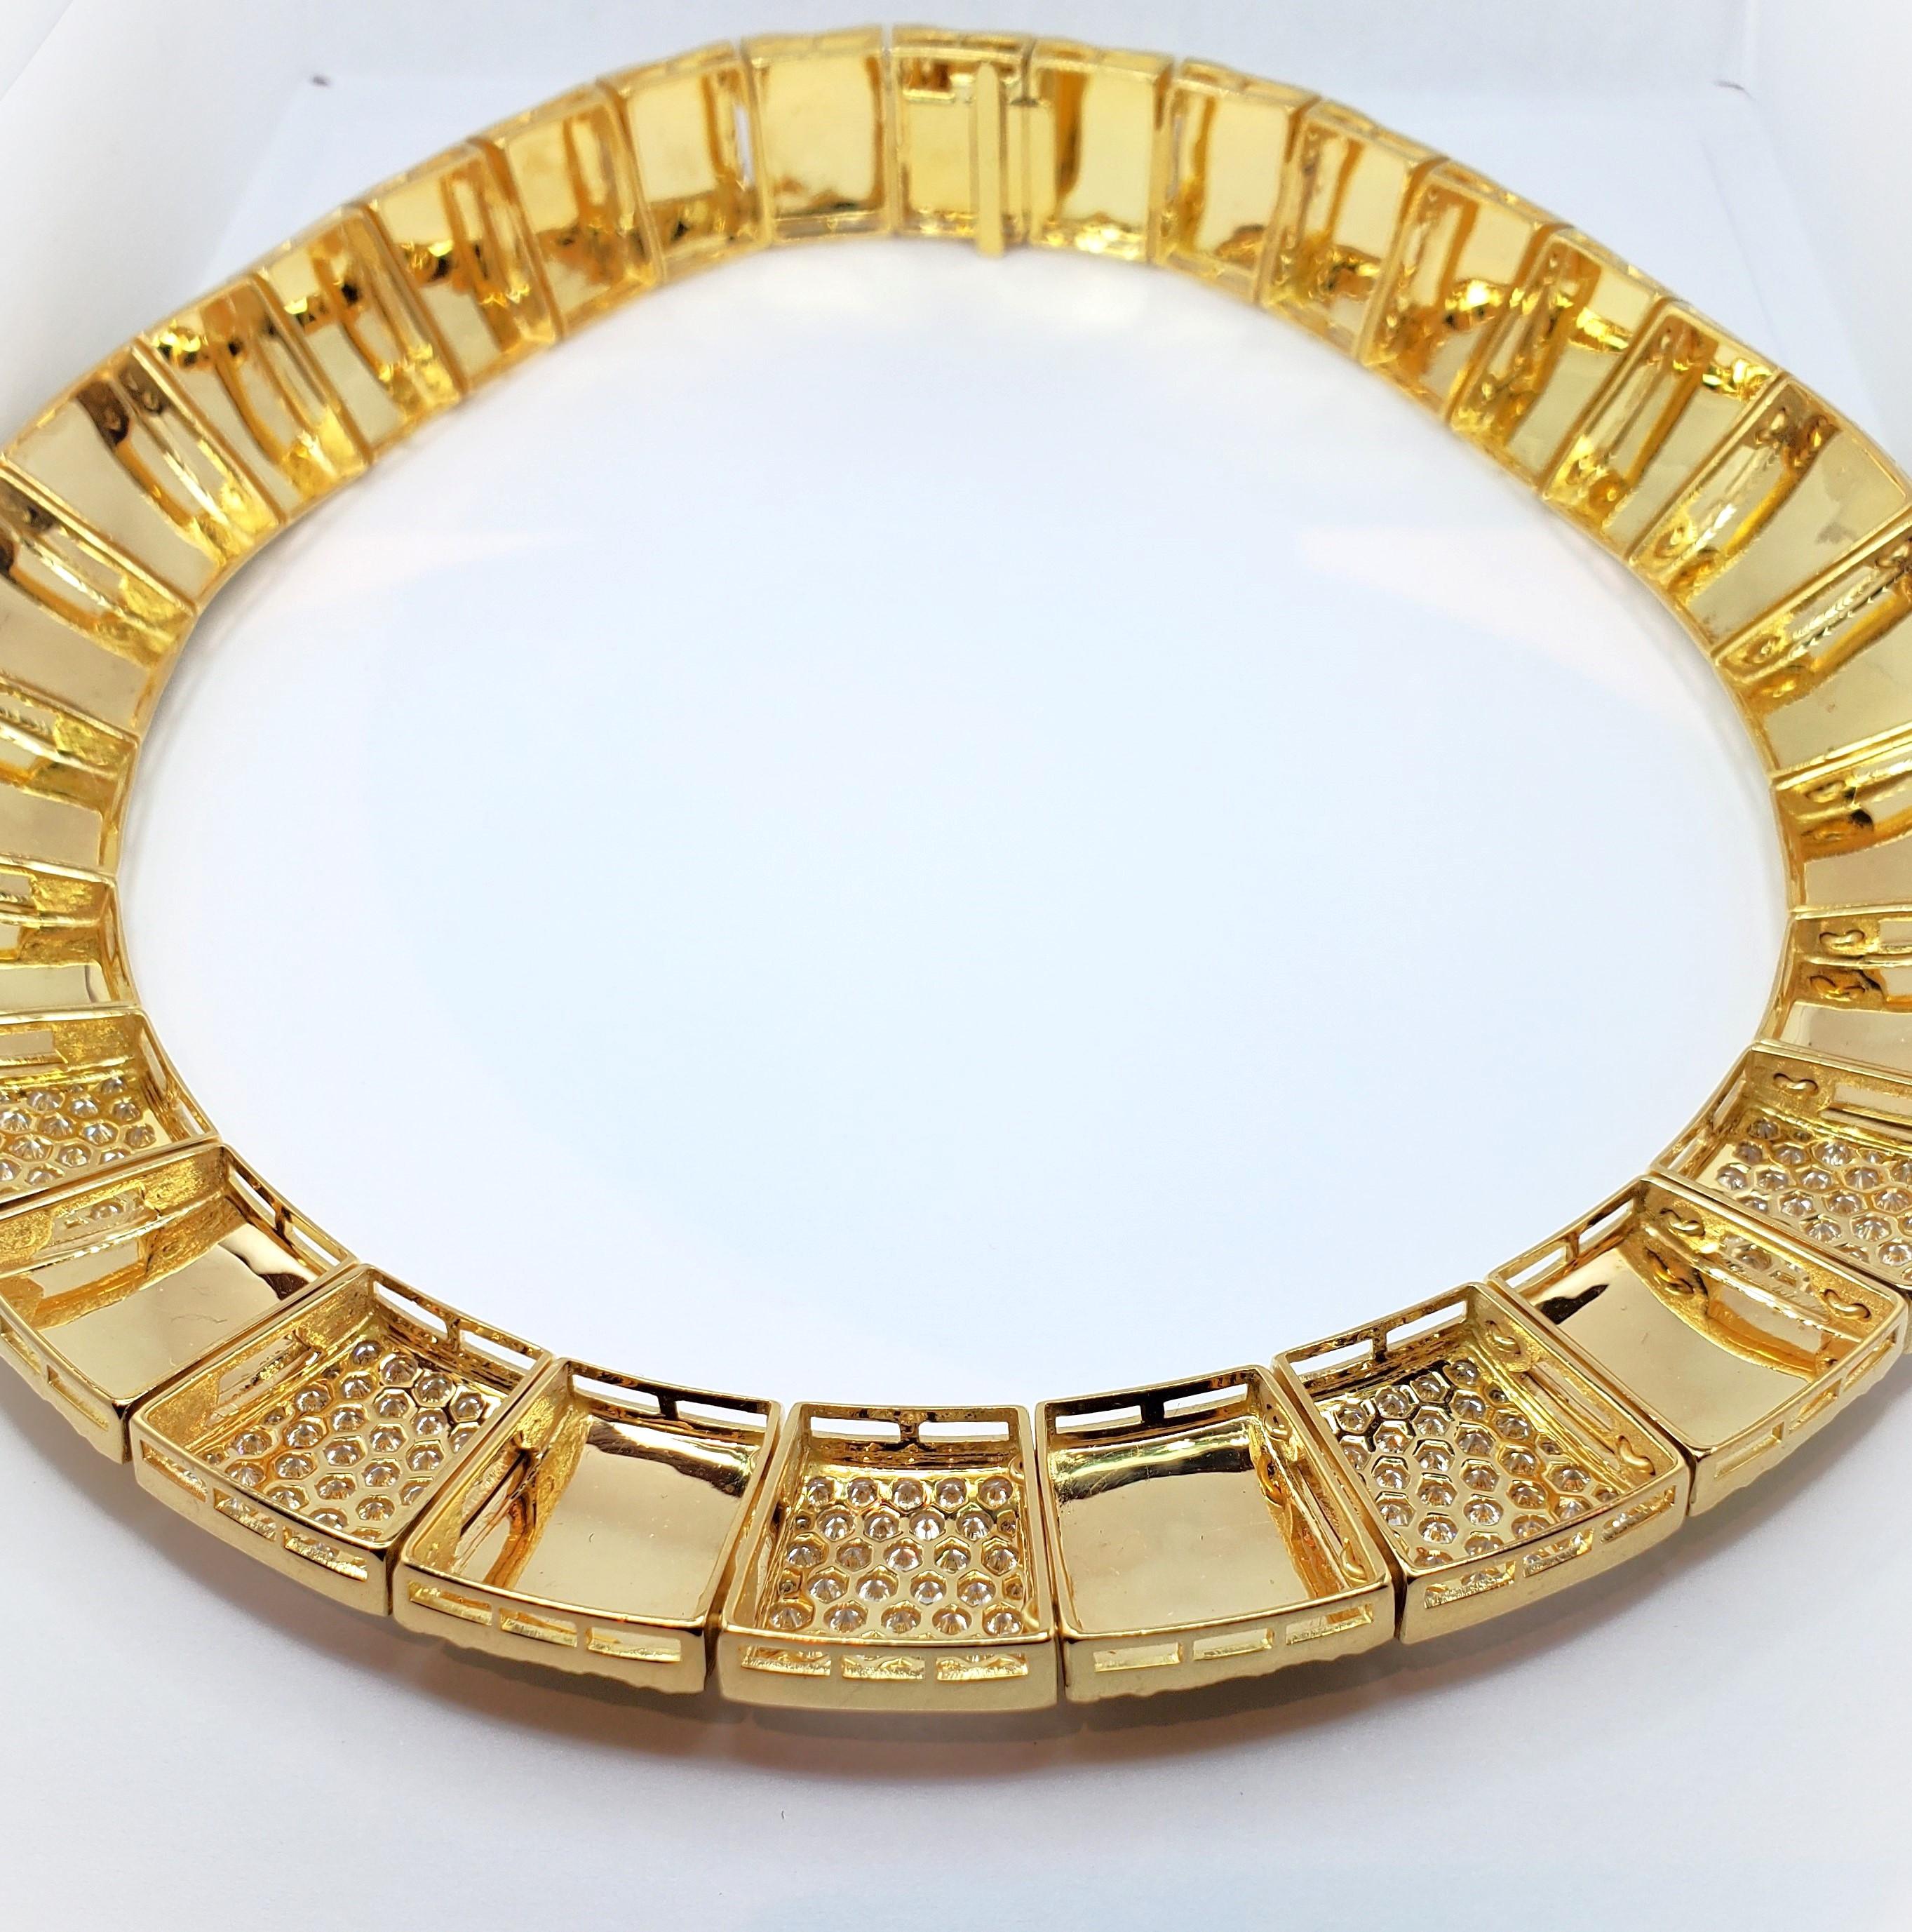 Channel your inner Cleopatra with this awe-inspiring necklace that draws inspiration from high end royal jewelry worn in ancient times. The reticulated gold segments are created out of 18k yellow gold and feature five sections of pave-set shimmering